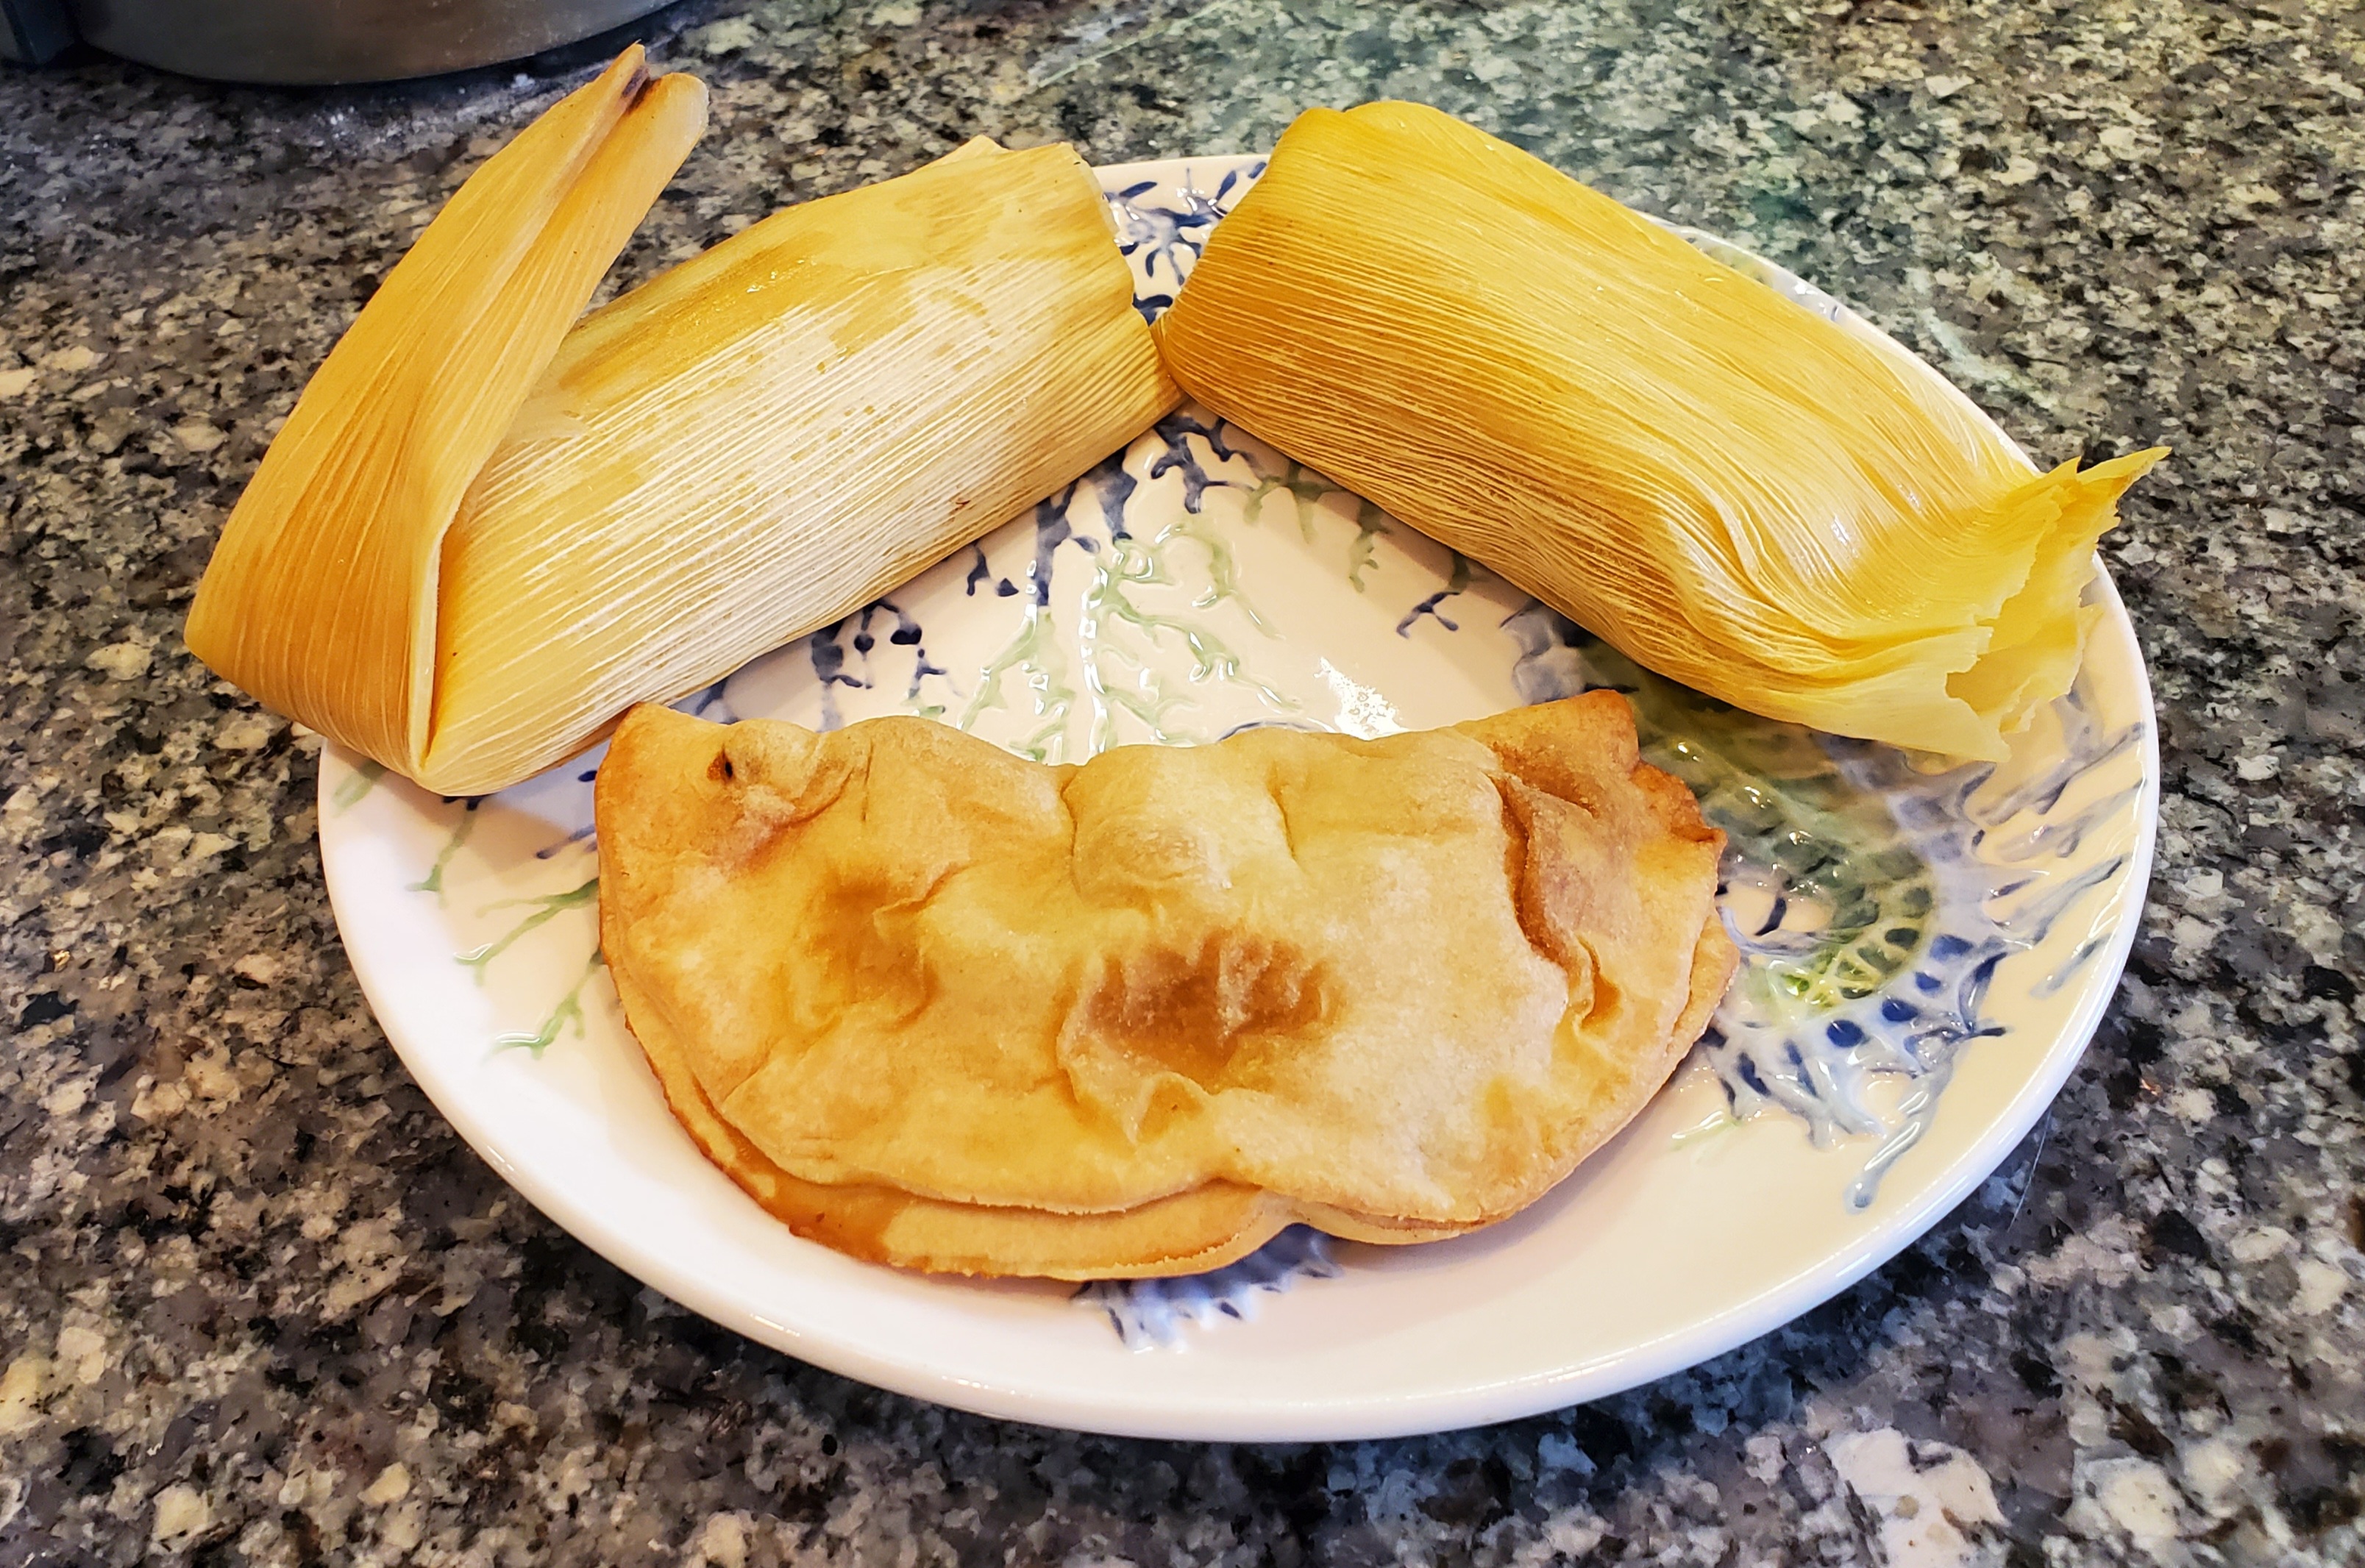 On a white plate with blue art, there are two tamales wrapped in corn husk and a soft empanada also on the table. Photo by Carl Busch.